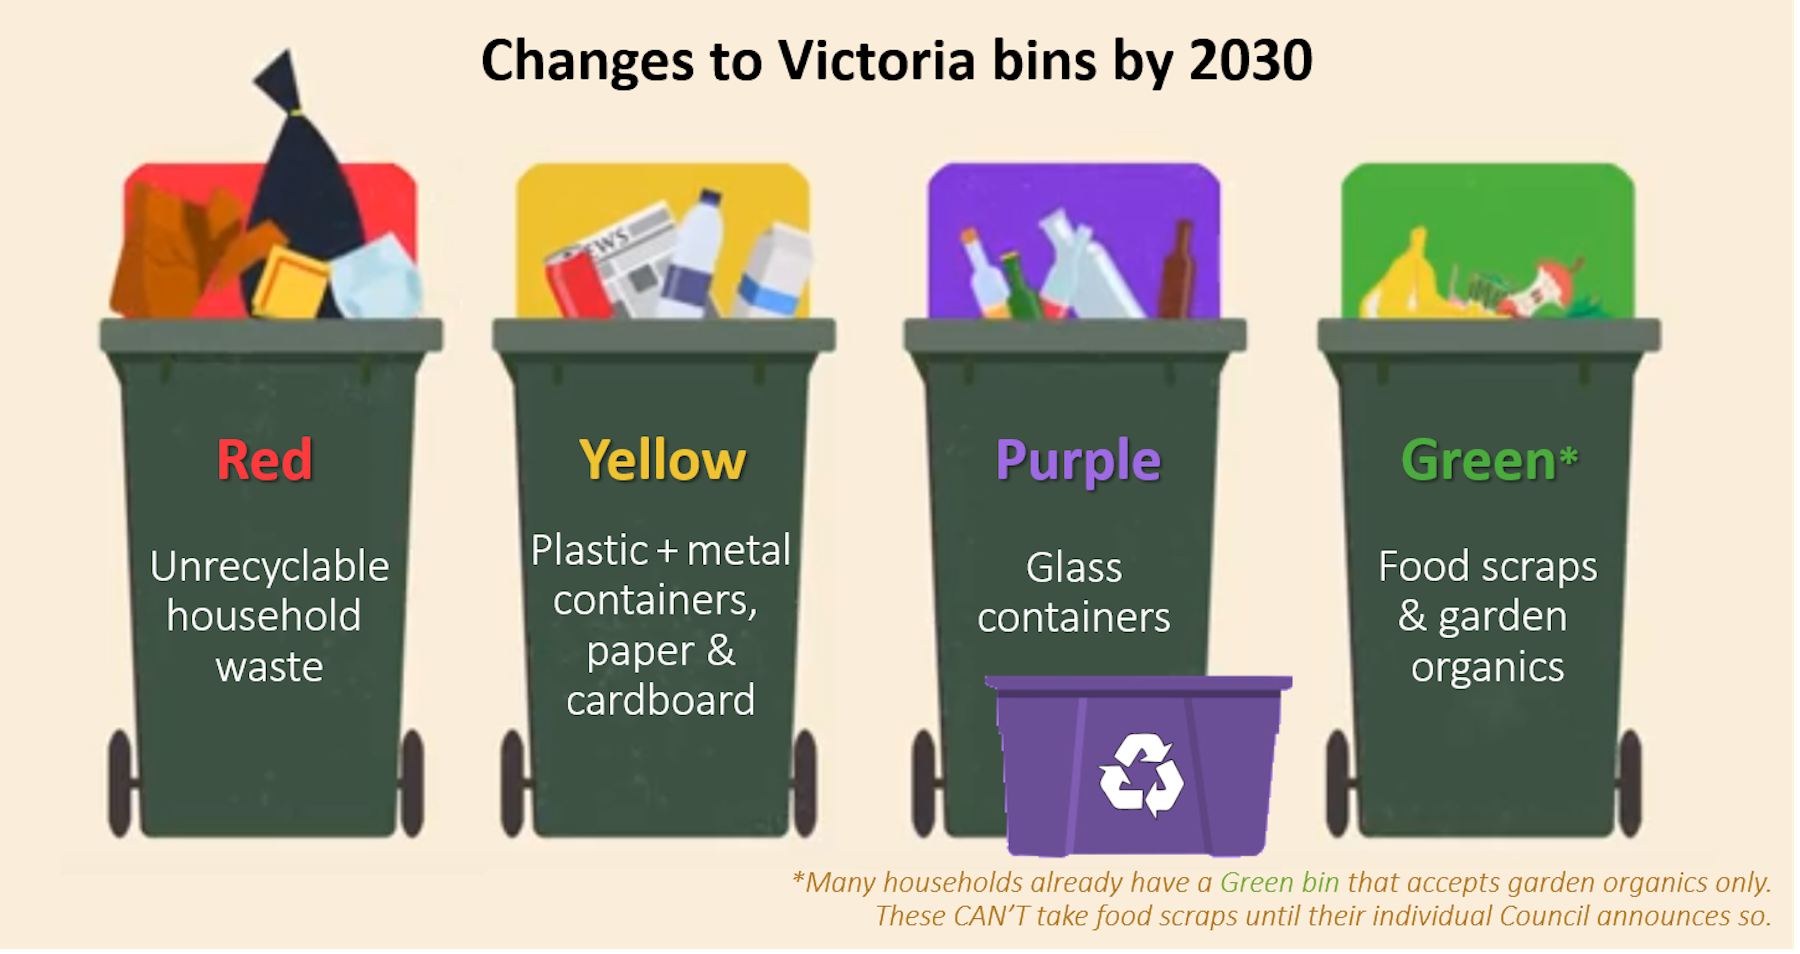 Four Bins Might Help But To Solve Our Waste Crisis We Need A Strong